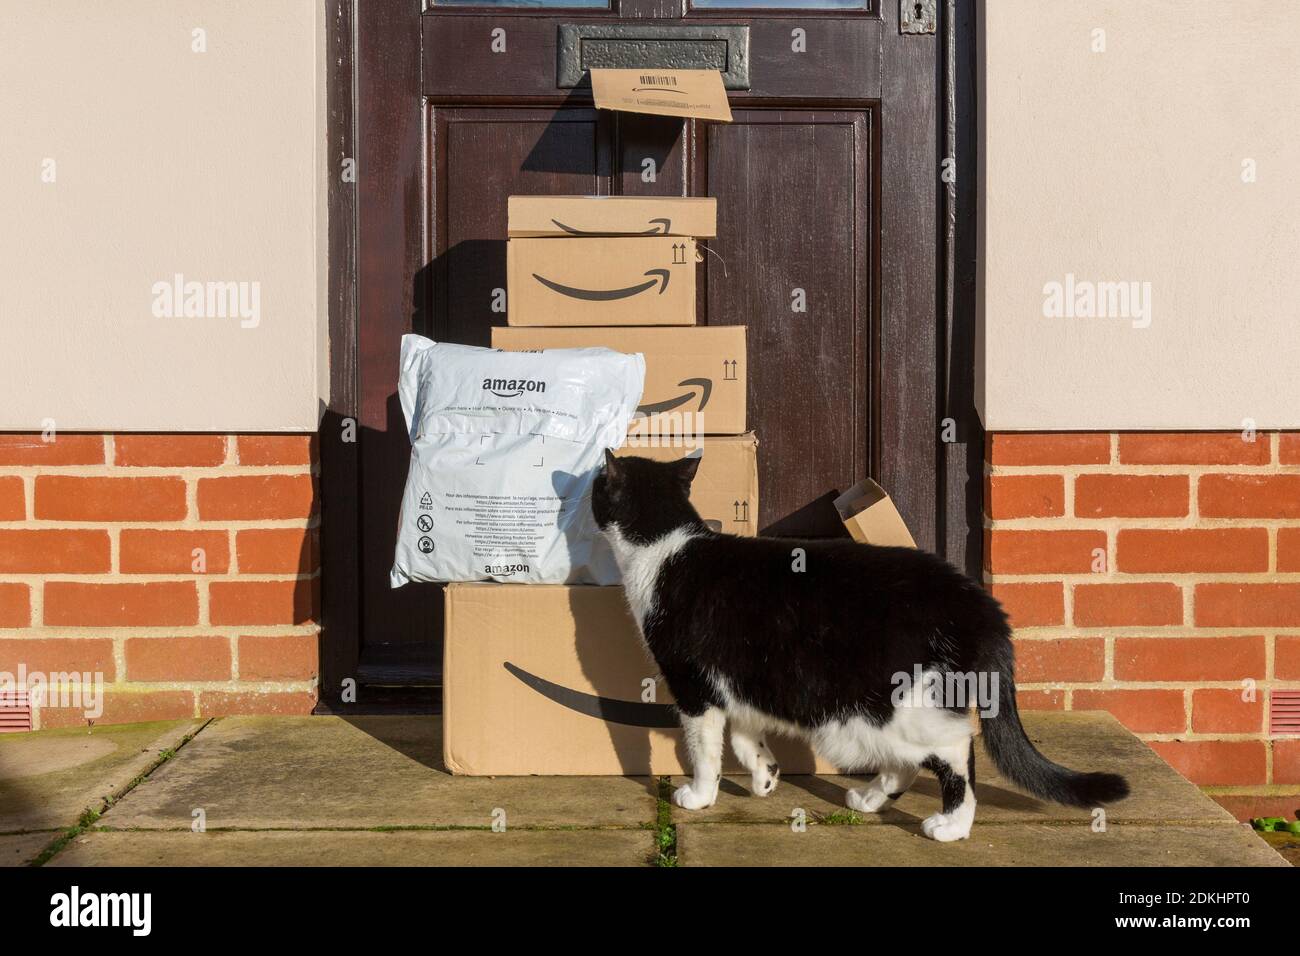 Online shopping so a delivery of amazon parcels, and boxes outside a front door with a curious cat. Stock Photo